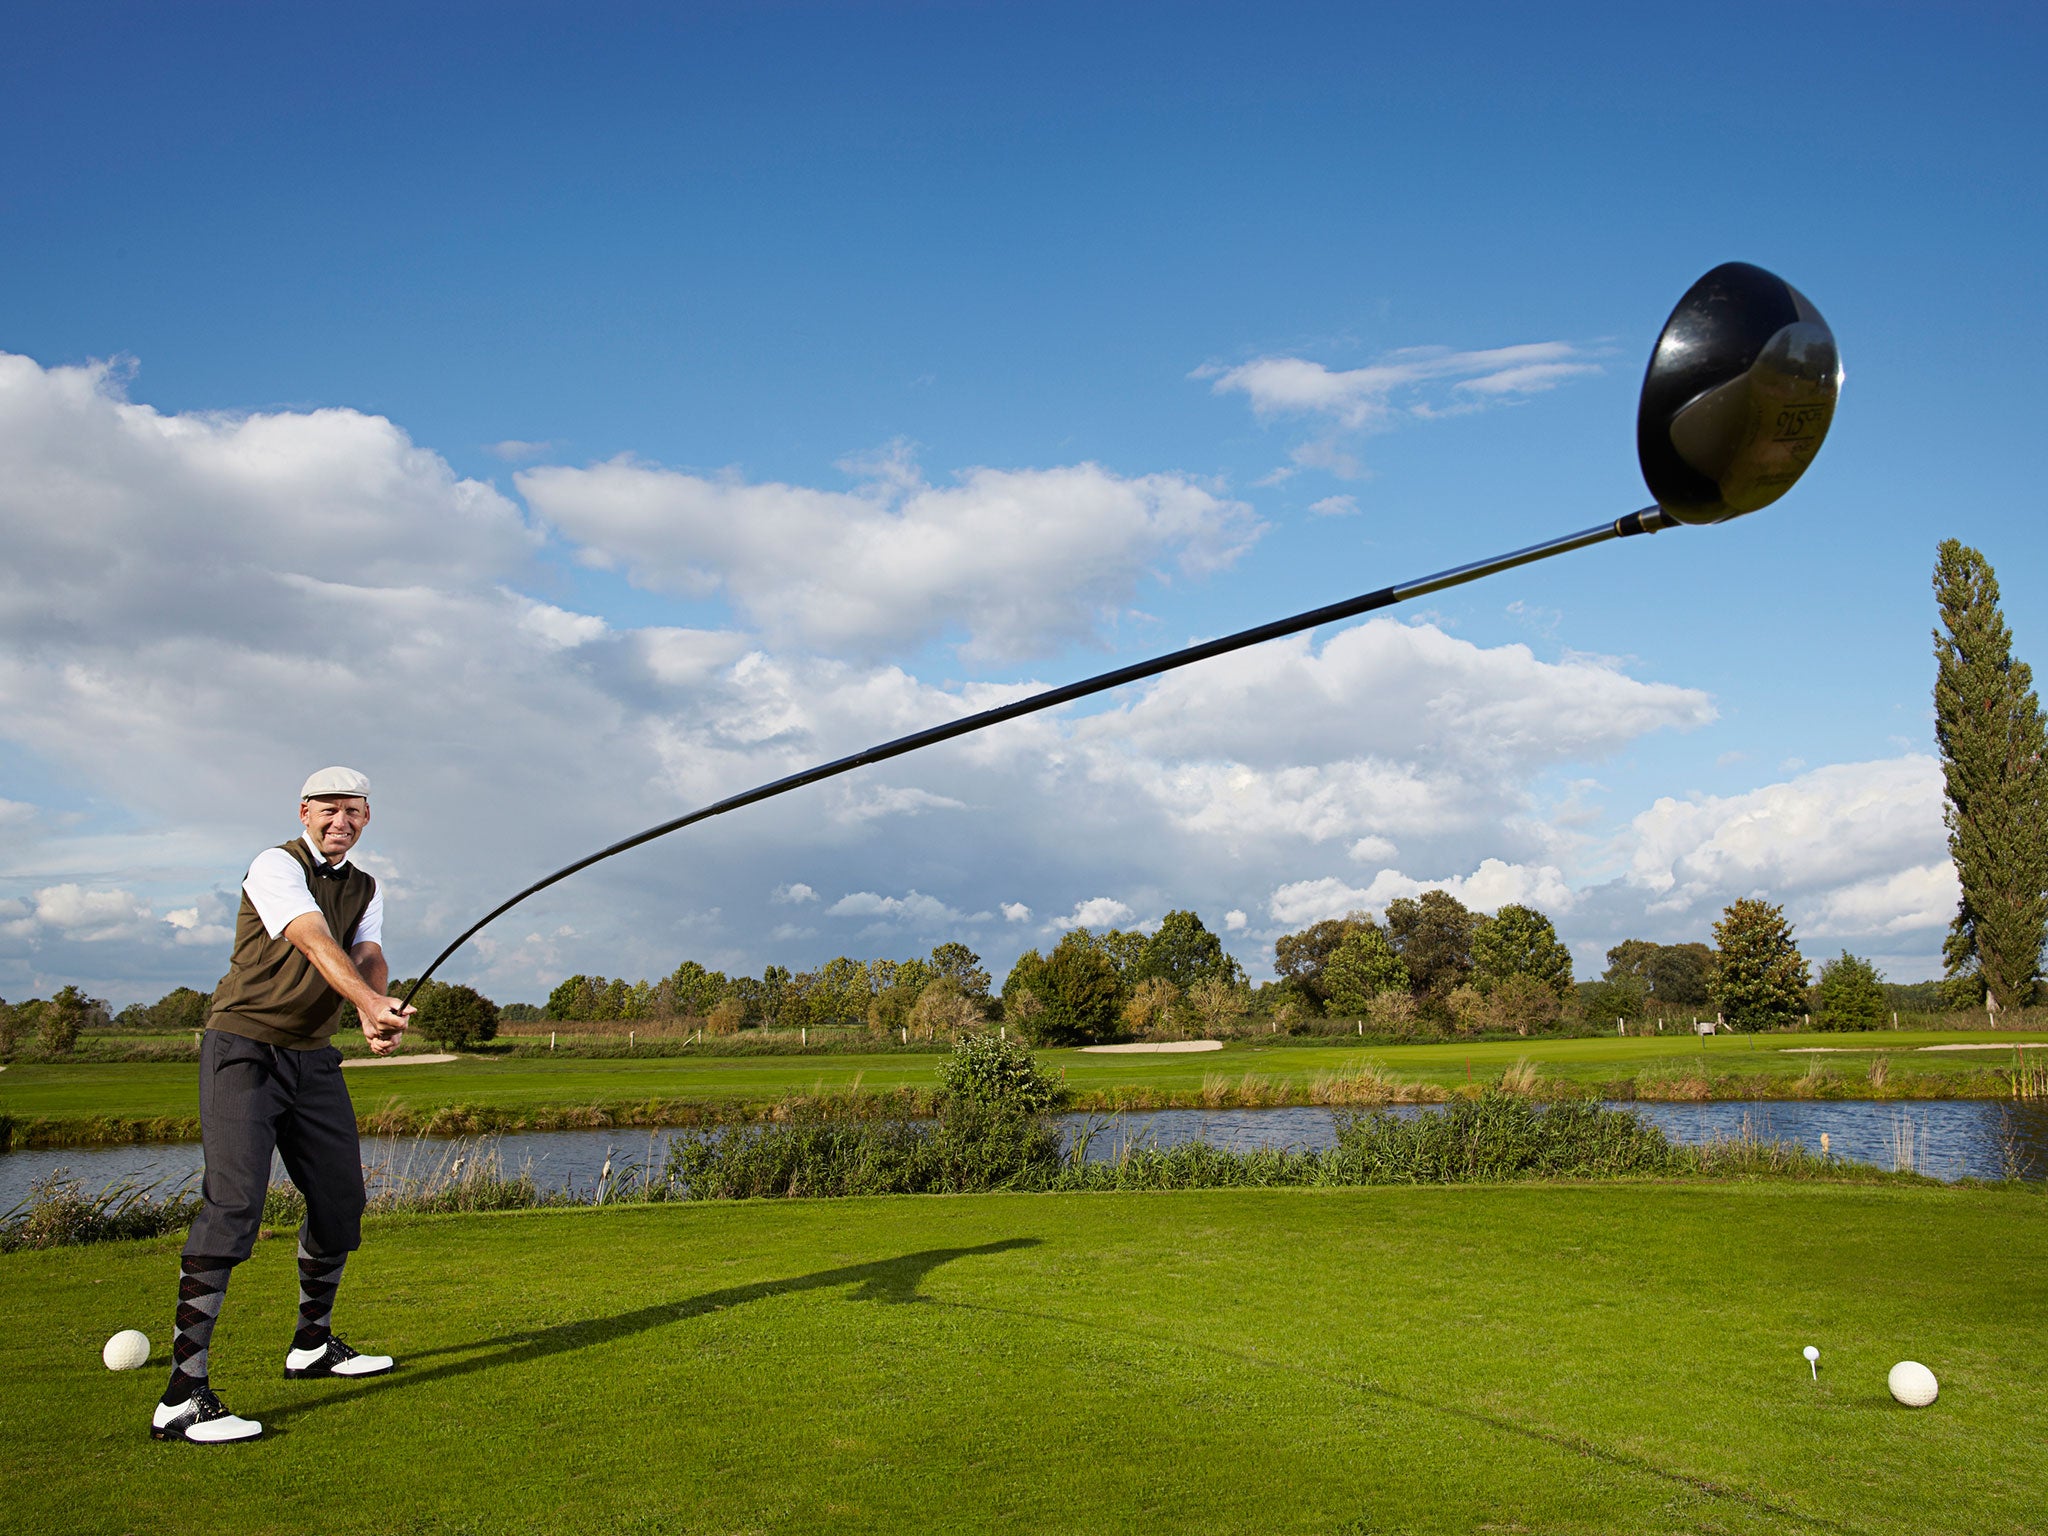 Karsten Maas in Germany takes a swing with the longest usable golf club at 14ft 5in.